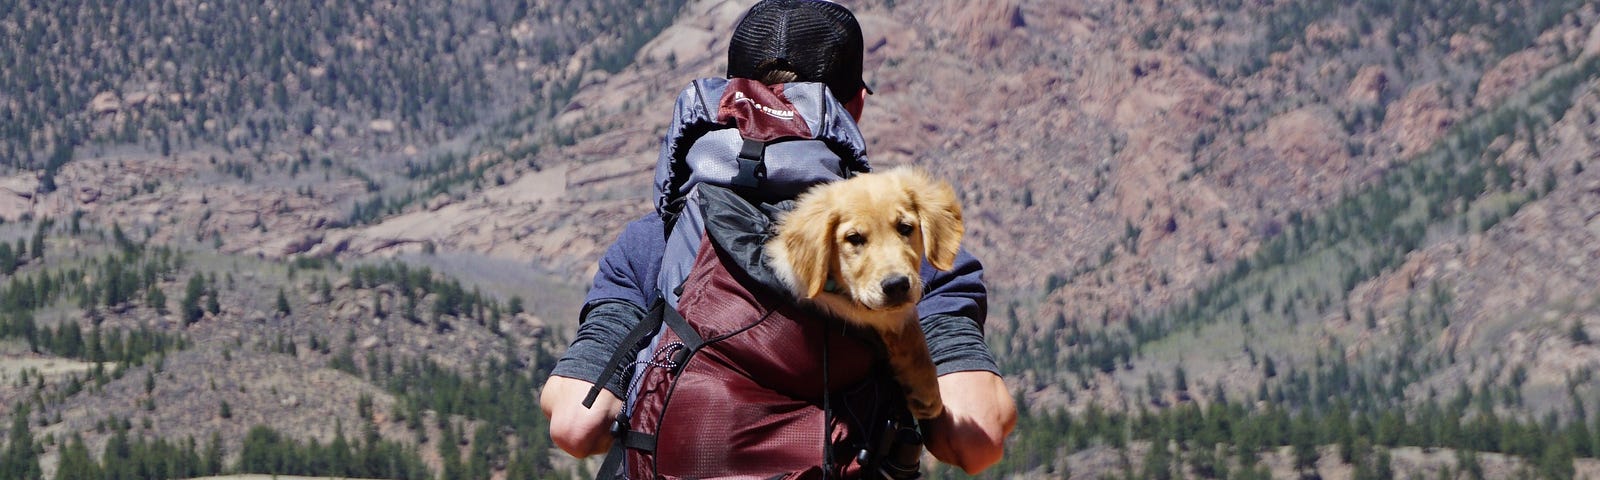 Dog in a hiker’s backpack in the mountains